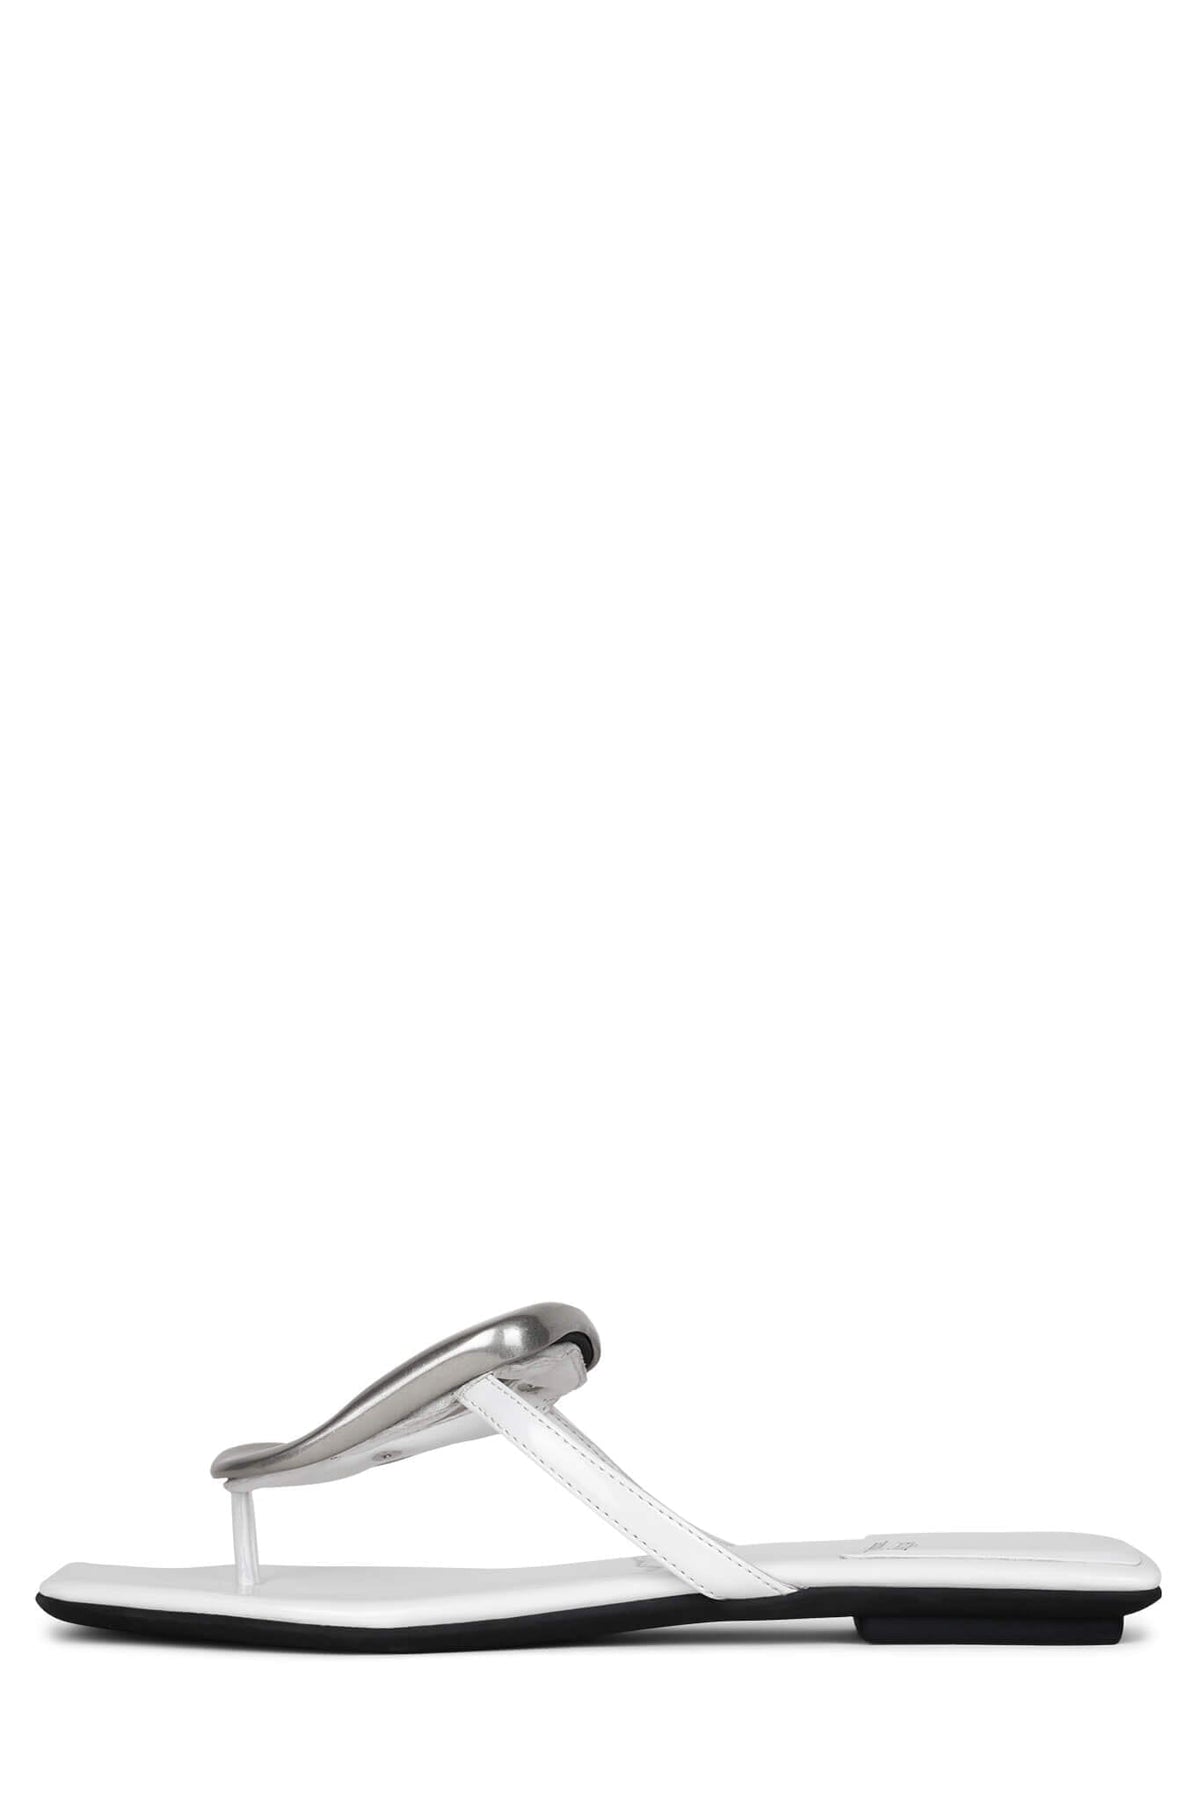 LINQUES-2 Jeffrey Campbell Flat Sandals White Patent Silver 